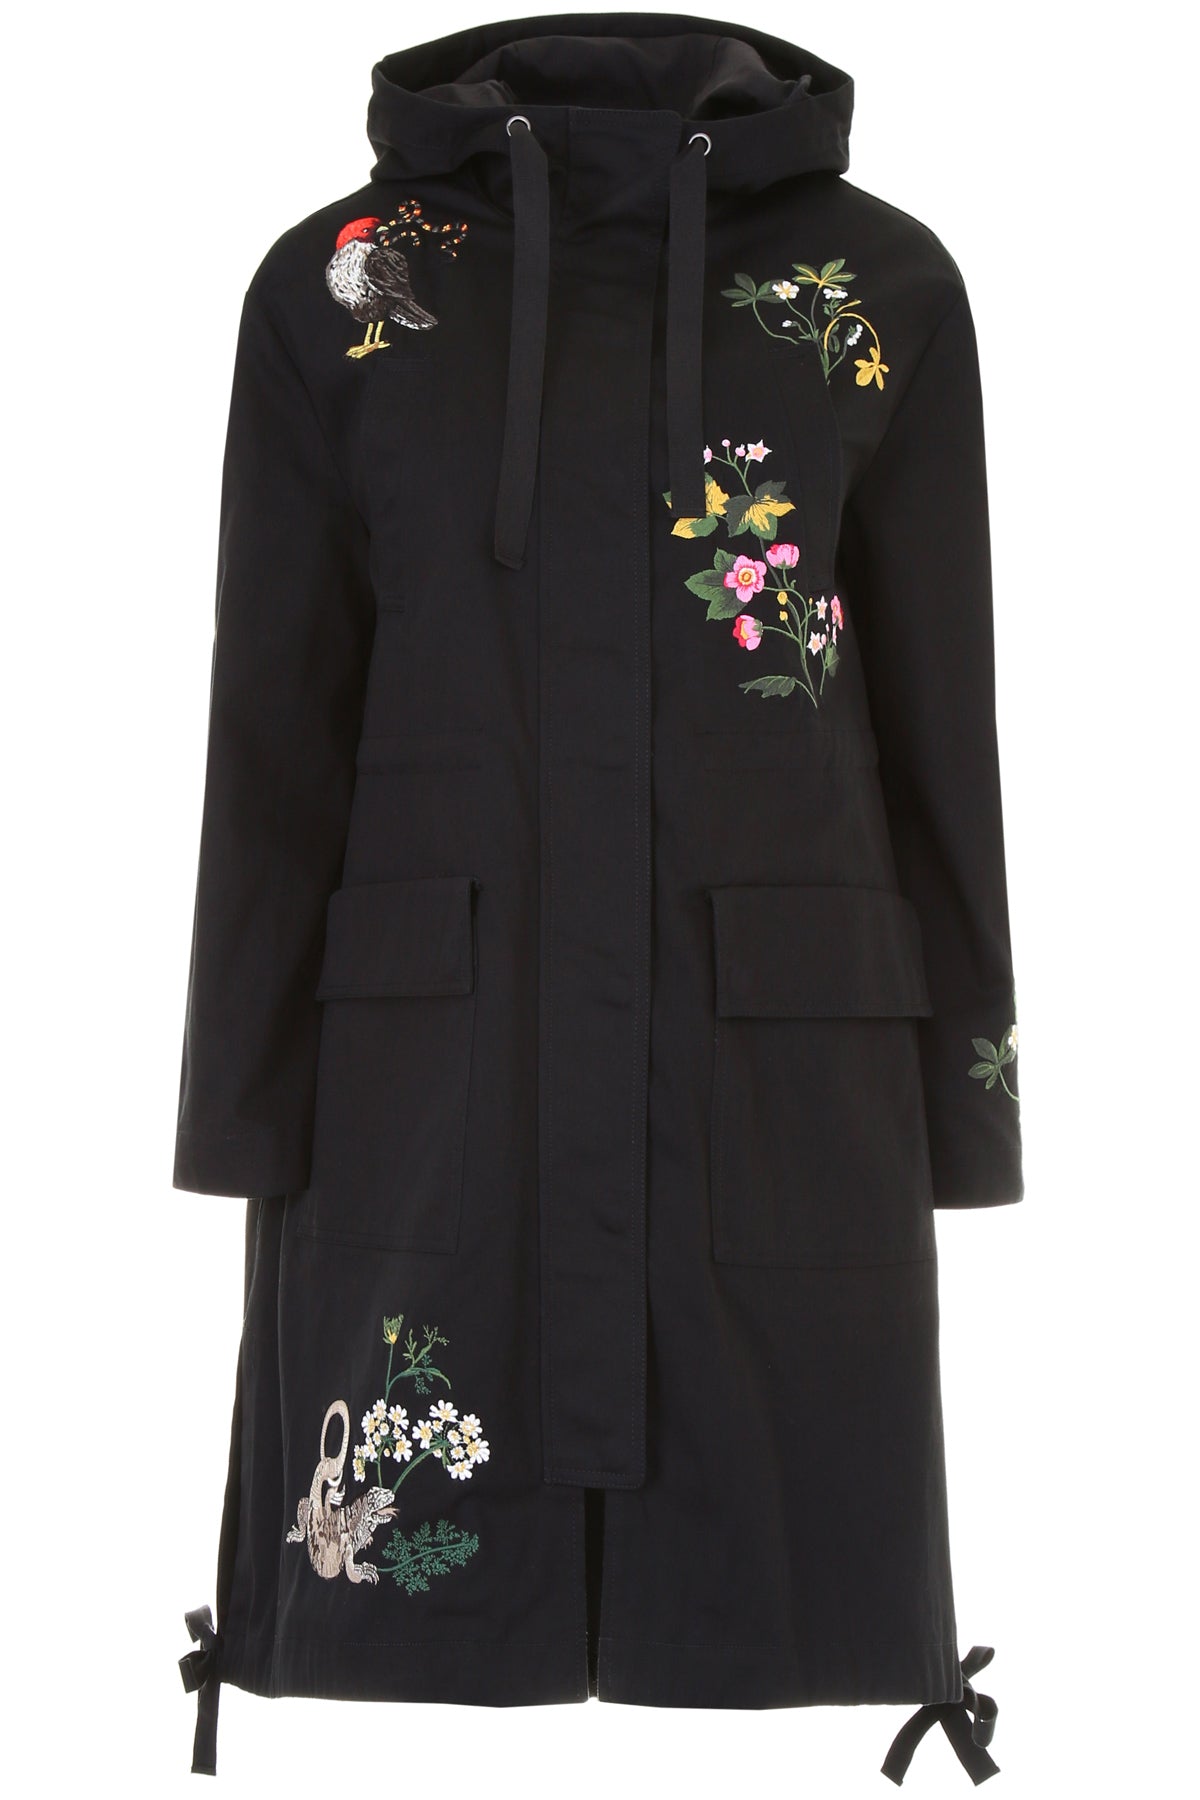 RED VALENTINO RED VALENTINO EMBROIDERED PARKA